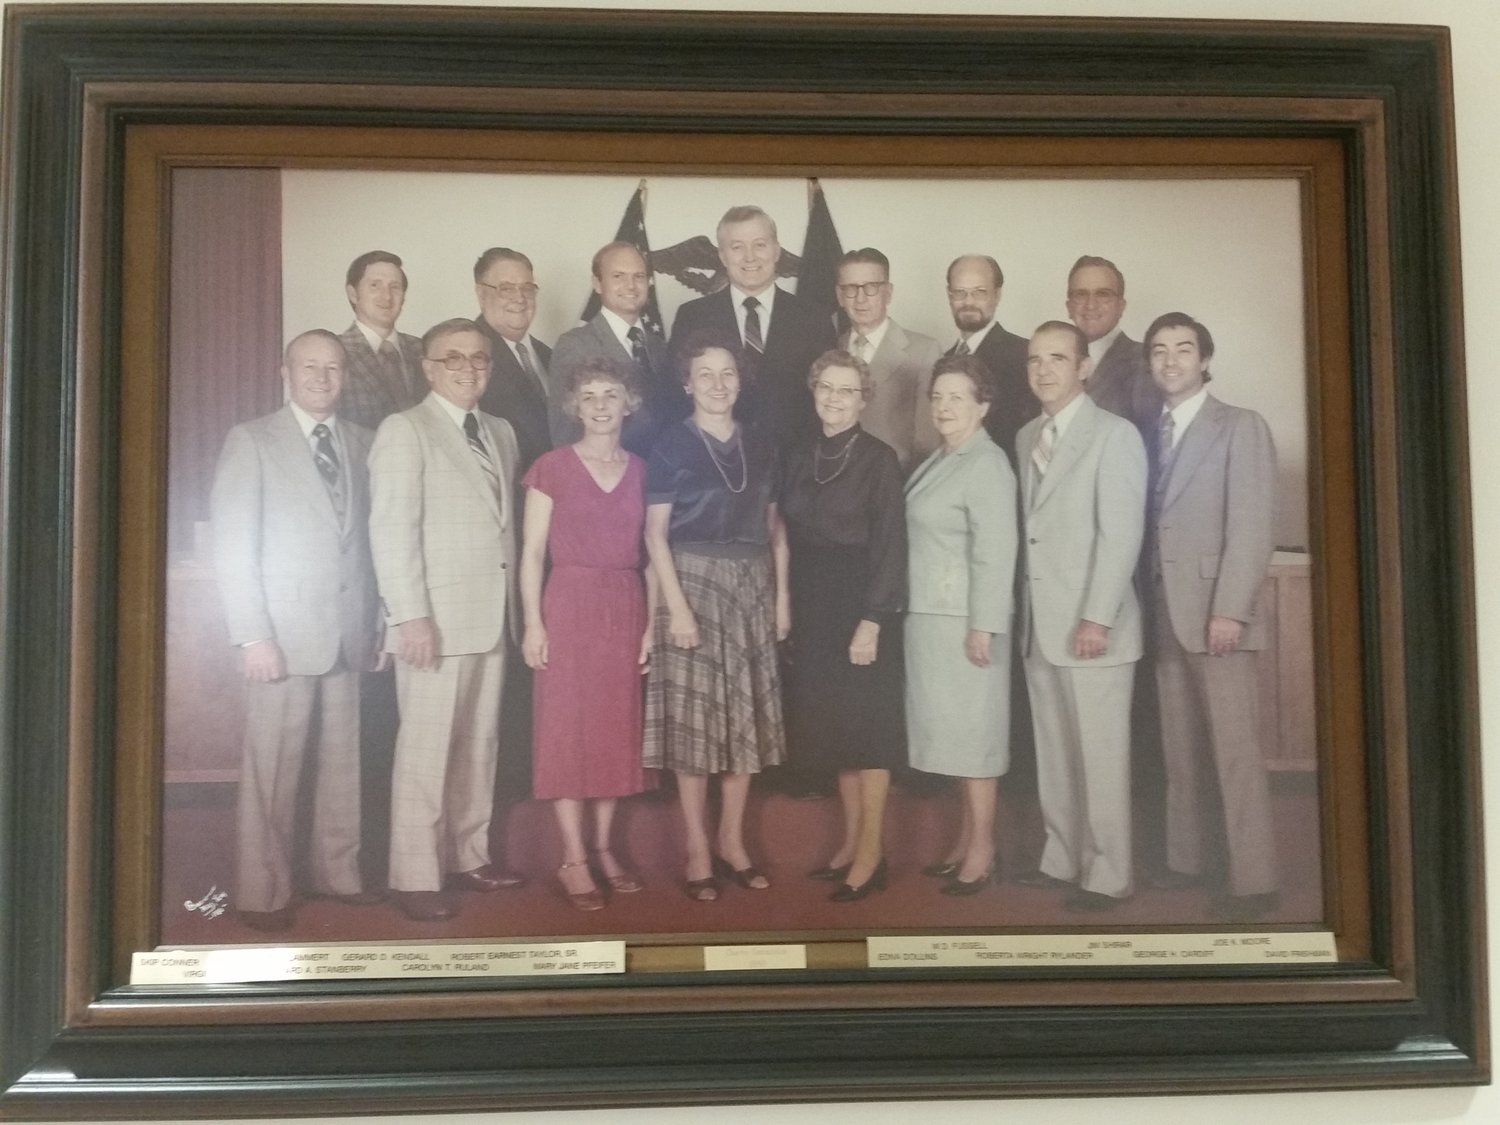 Stanberry served on the Katy Home Rule Charter Committee in 1979 and was a founding member of the local VFW post. This photo hangs in Katy City Hall to this day.